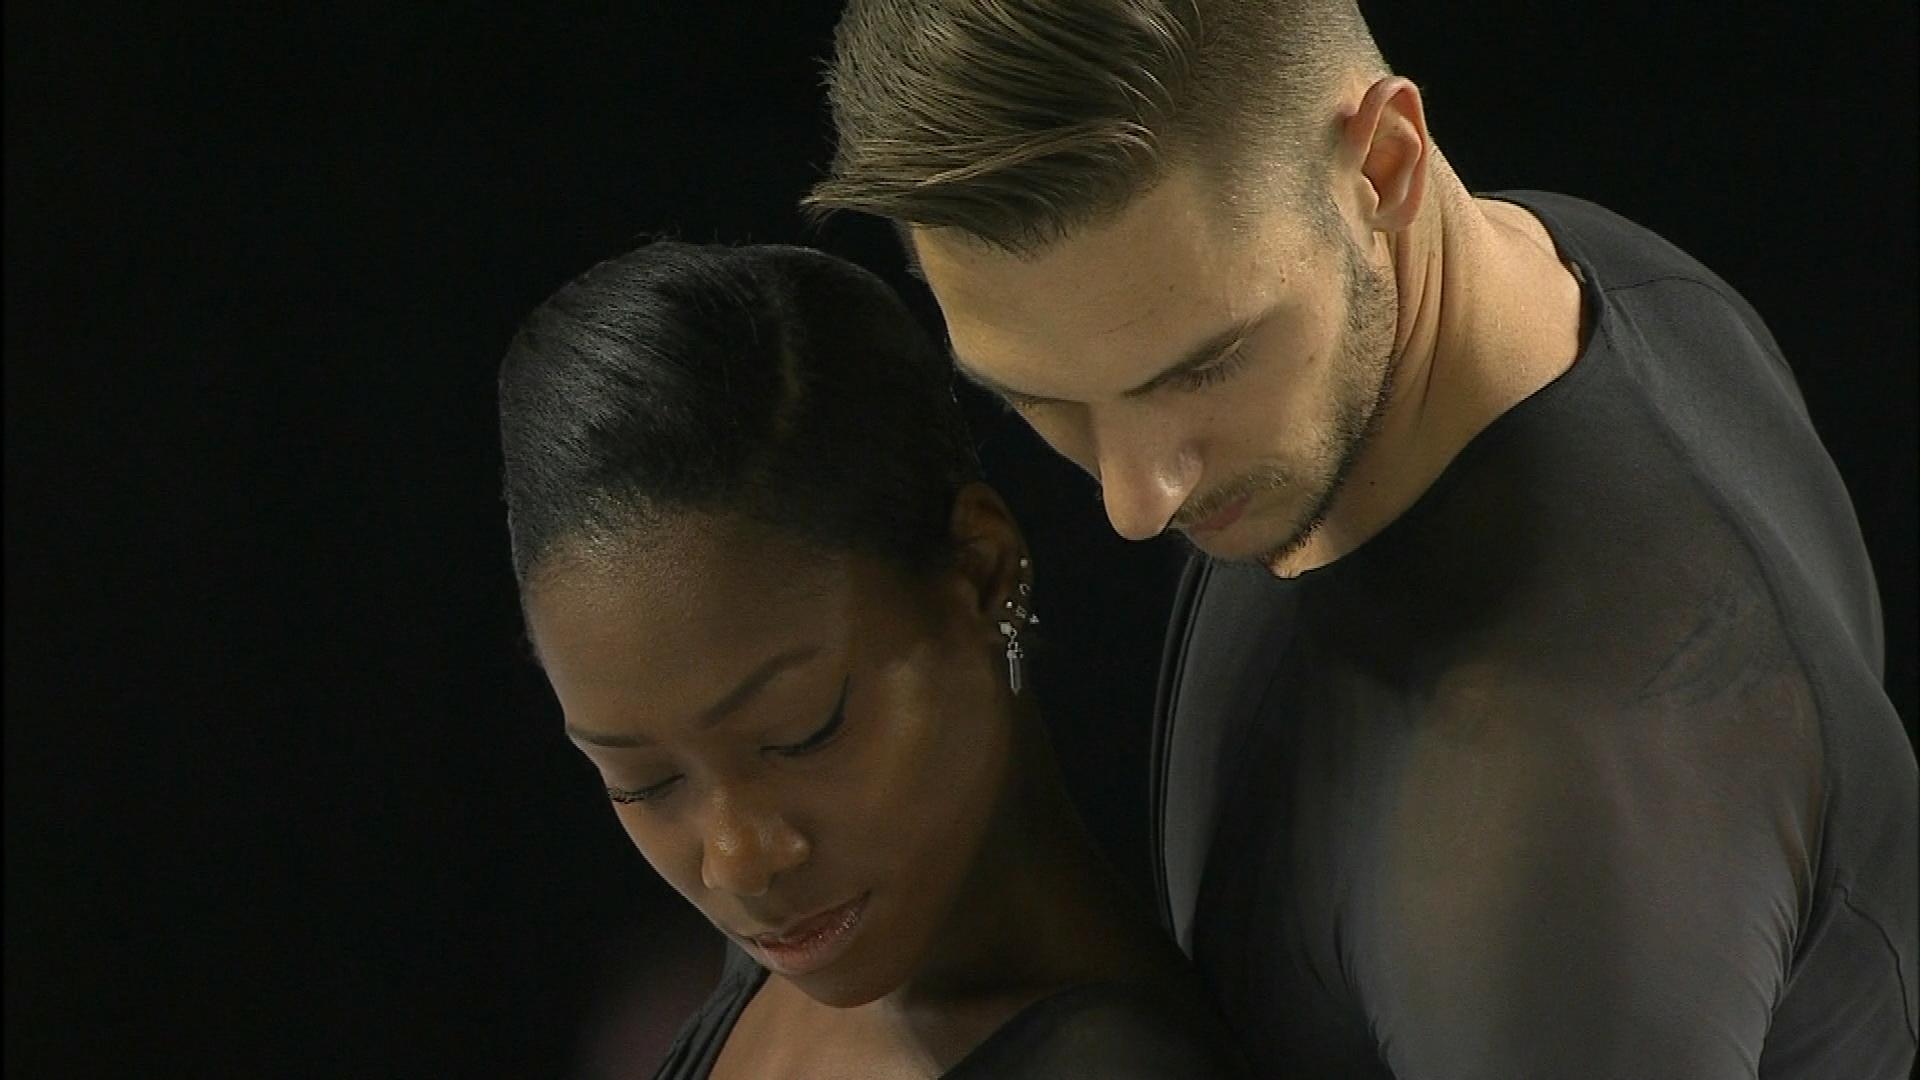 In their debut at the event, France's Vanessa James and Morgan Cipres ...